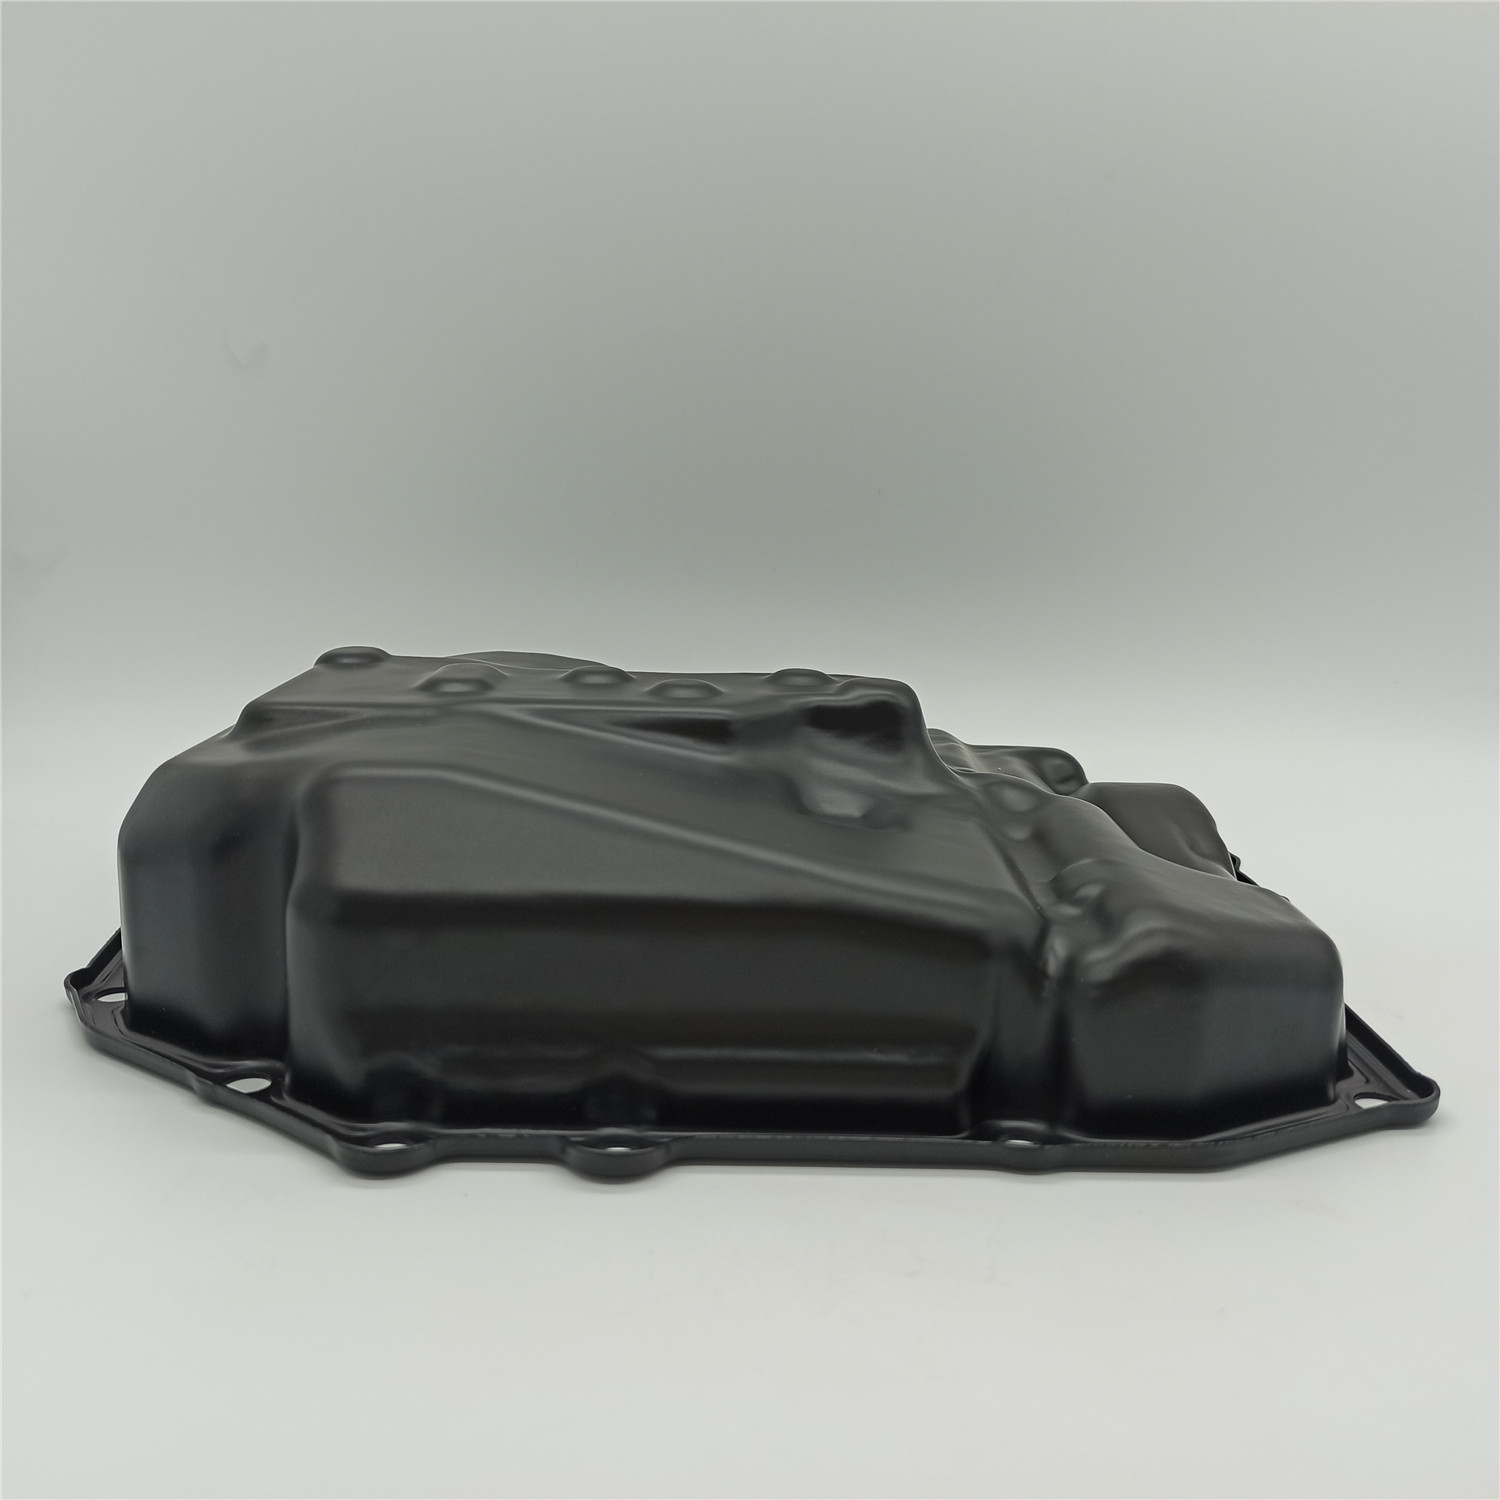 TF72SC-0005-AM TF72SC AUTOMATIC TRANSMISSION OIL PAN FROM Aftermarket Good Quality FIT FOR MINI